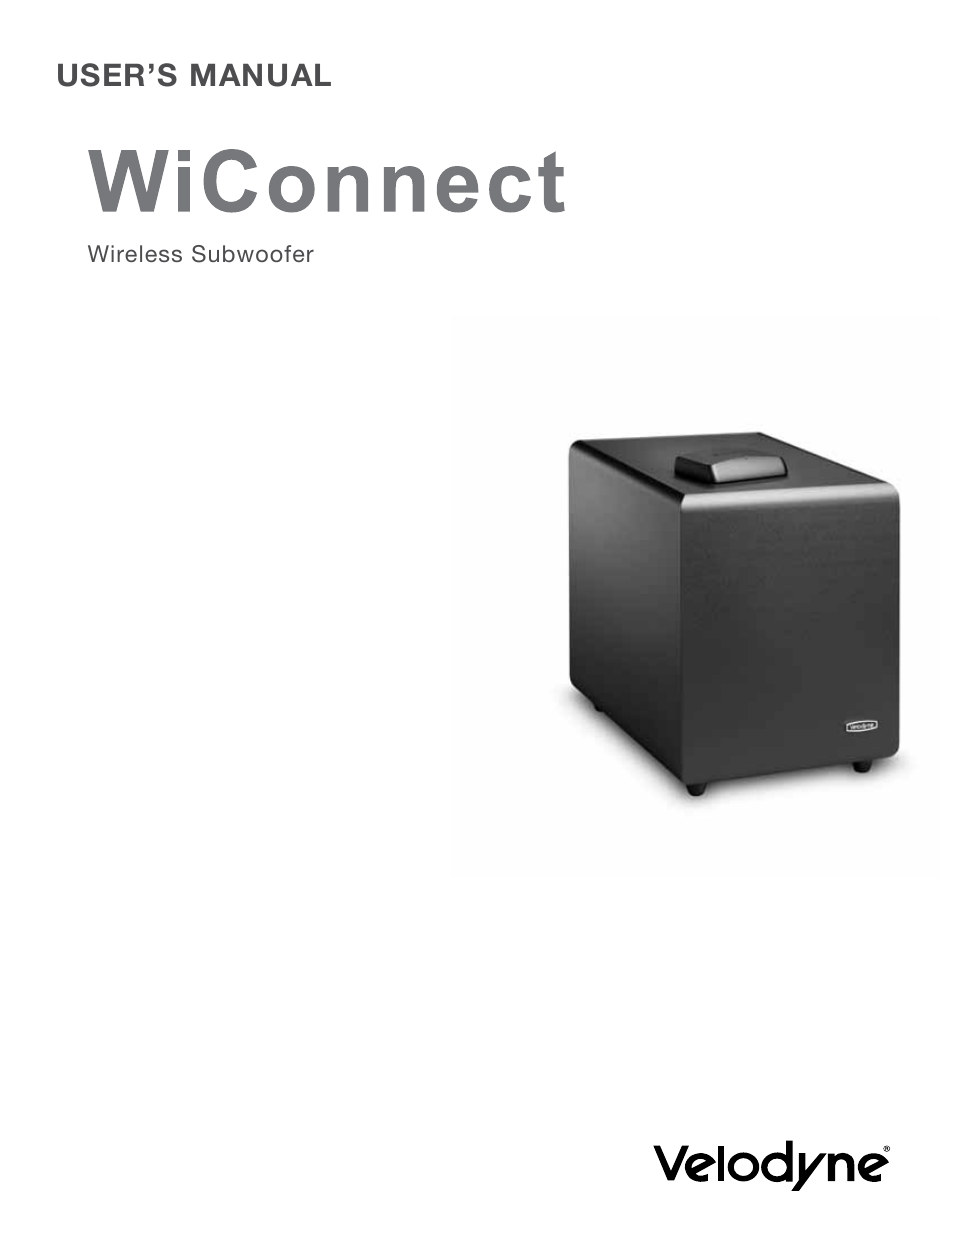 WiConnect